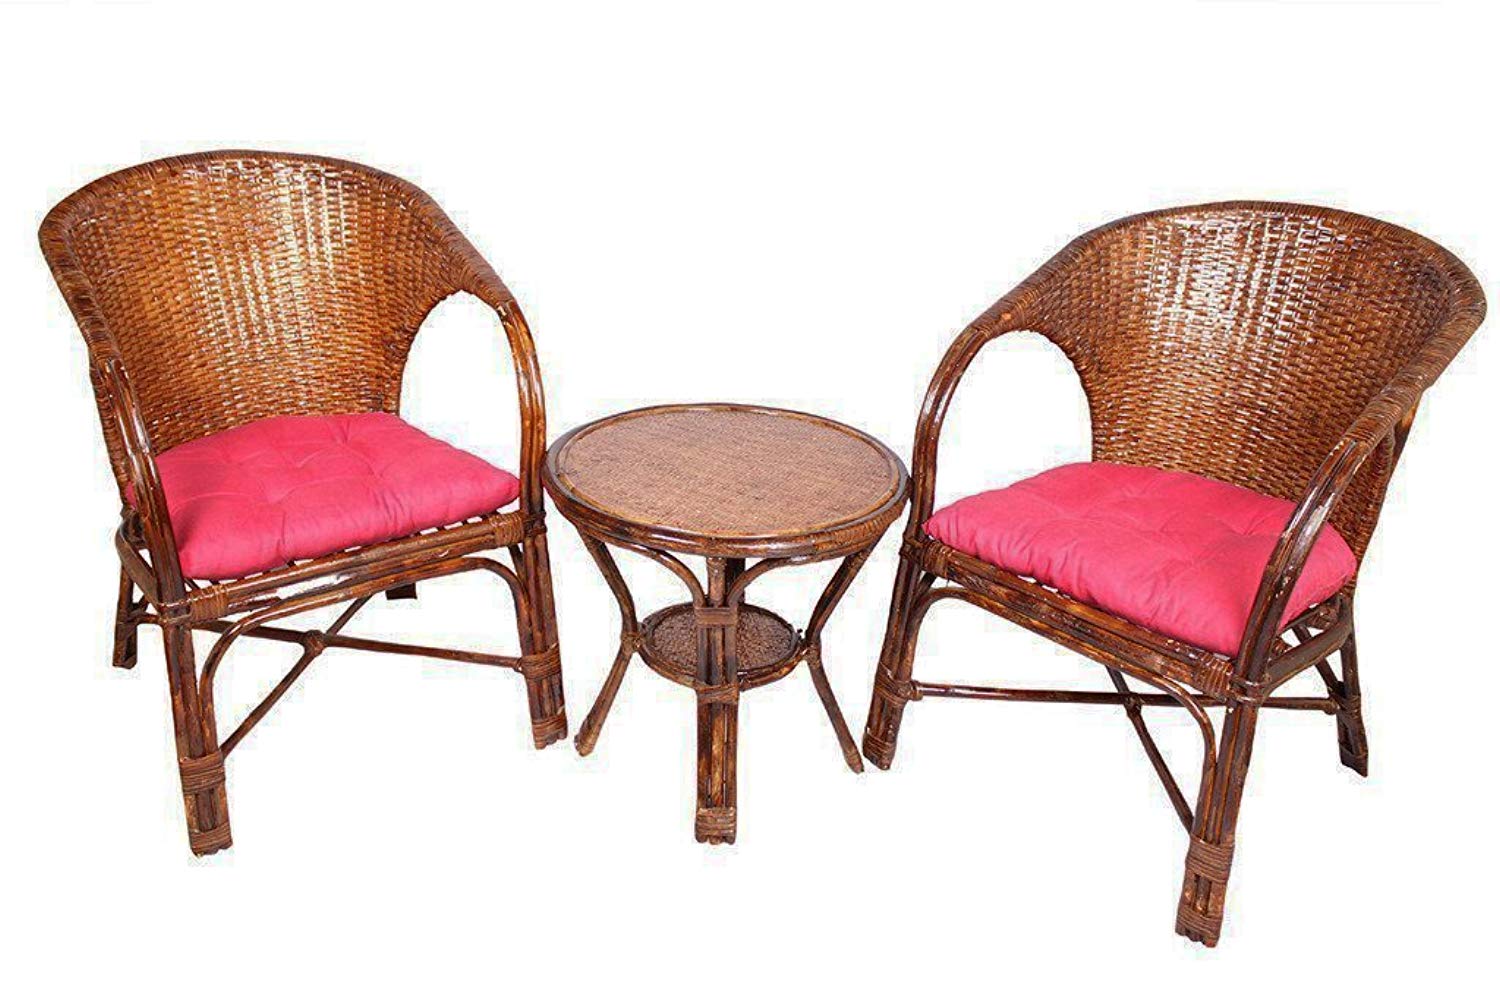 IRA Wicker Arm Chair with Table and Cushion - IRA Furniture